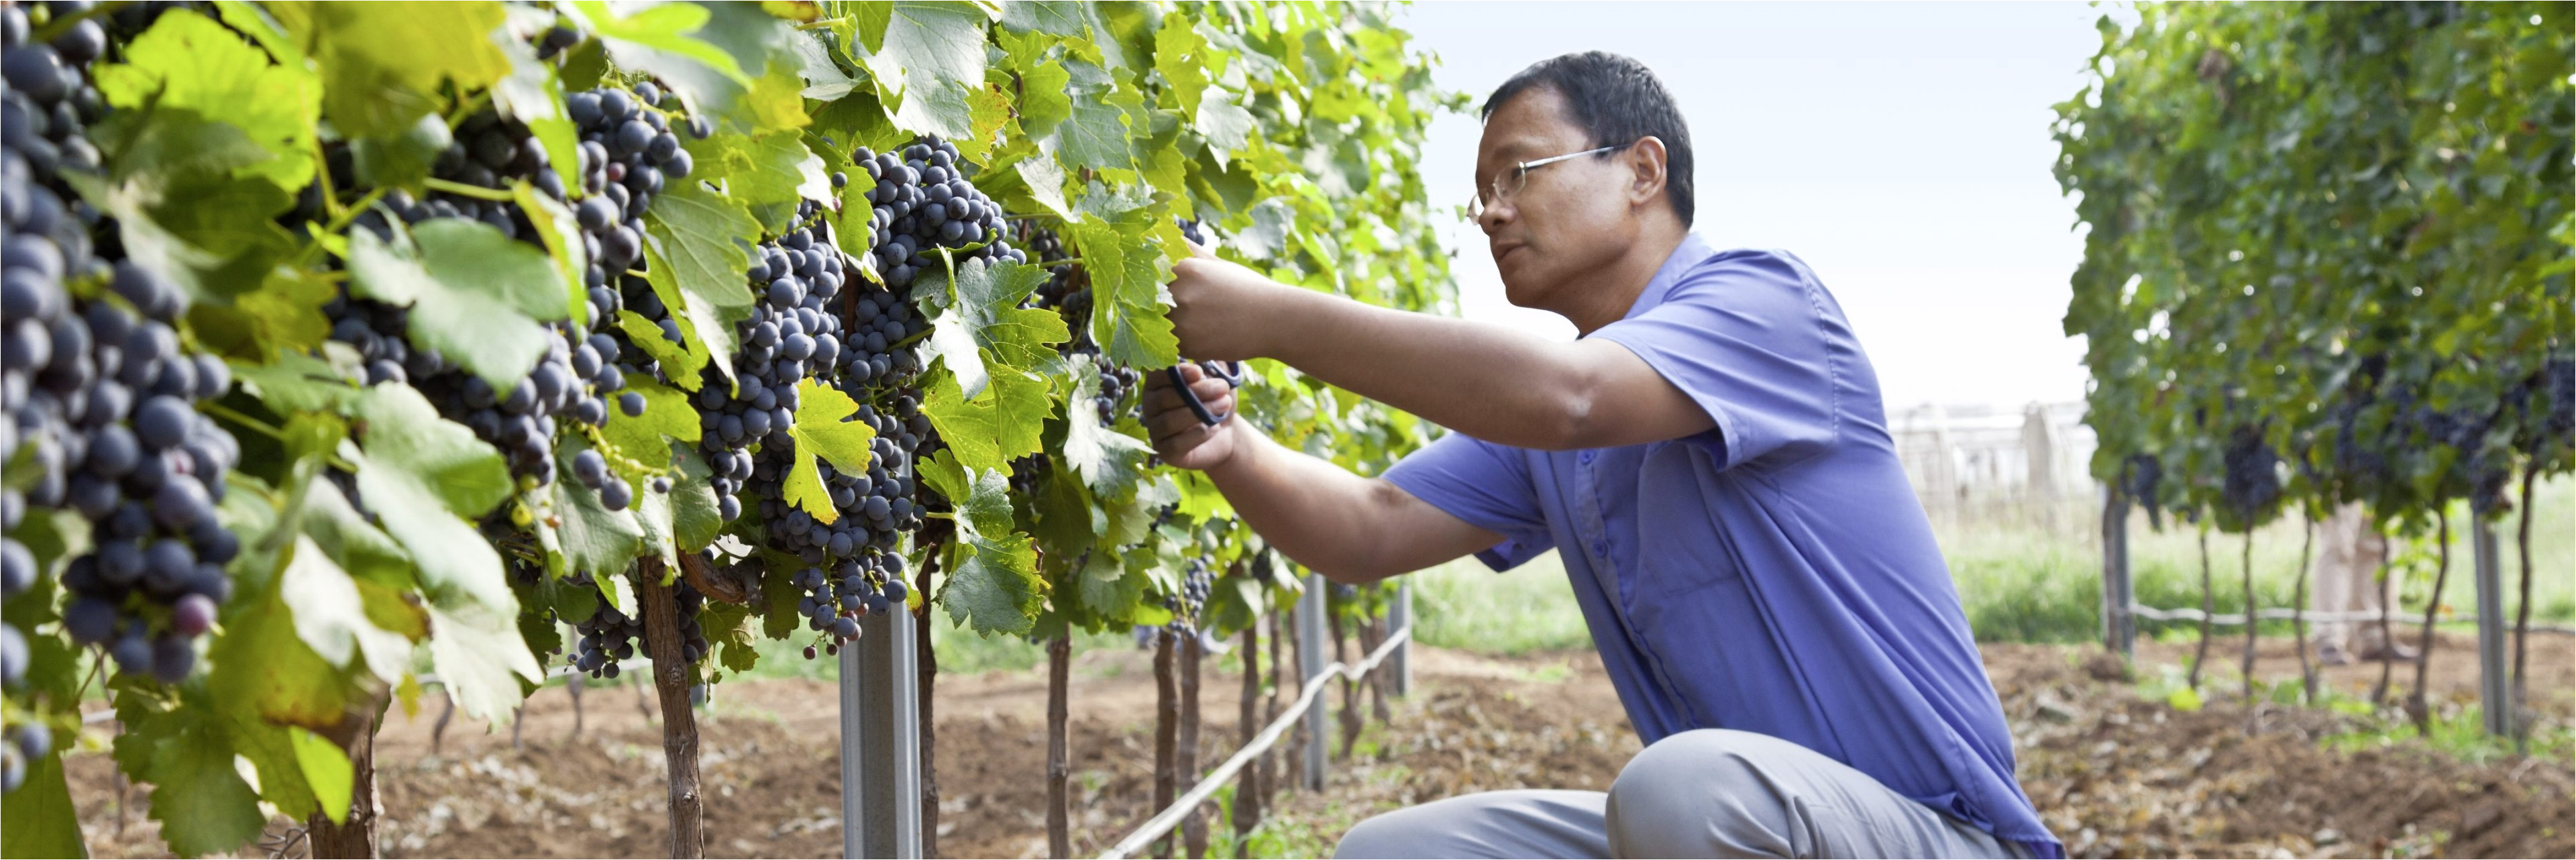 enhancing the winemaking process from the soil to the bottle